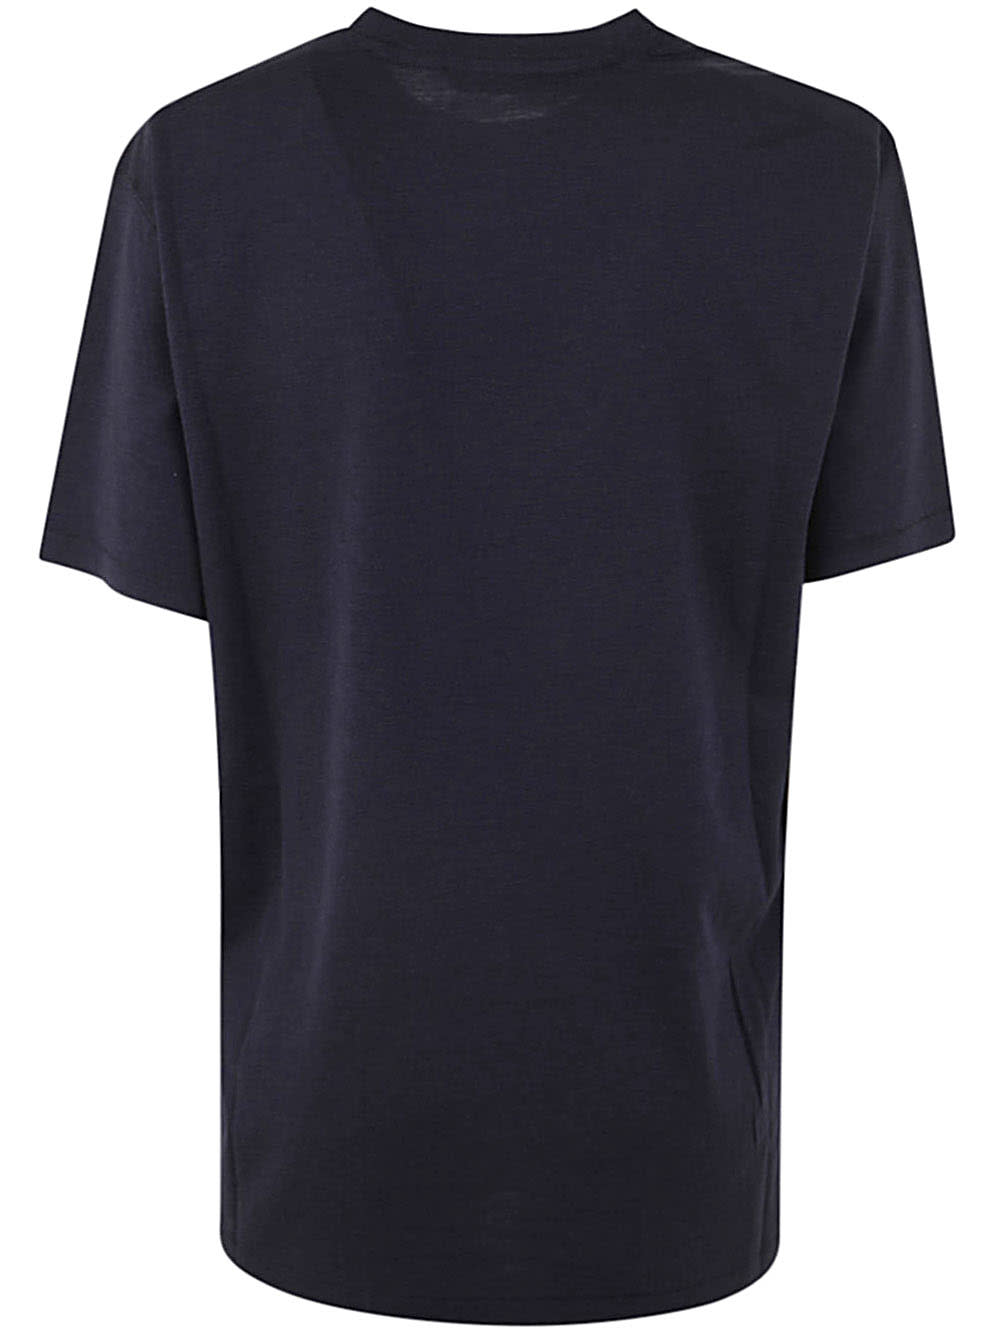 Shop Tom Ford Cut And Sewn Crew Neck T-shirt In Dark Blue